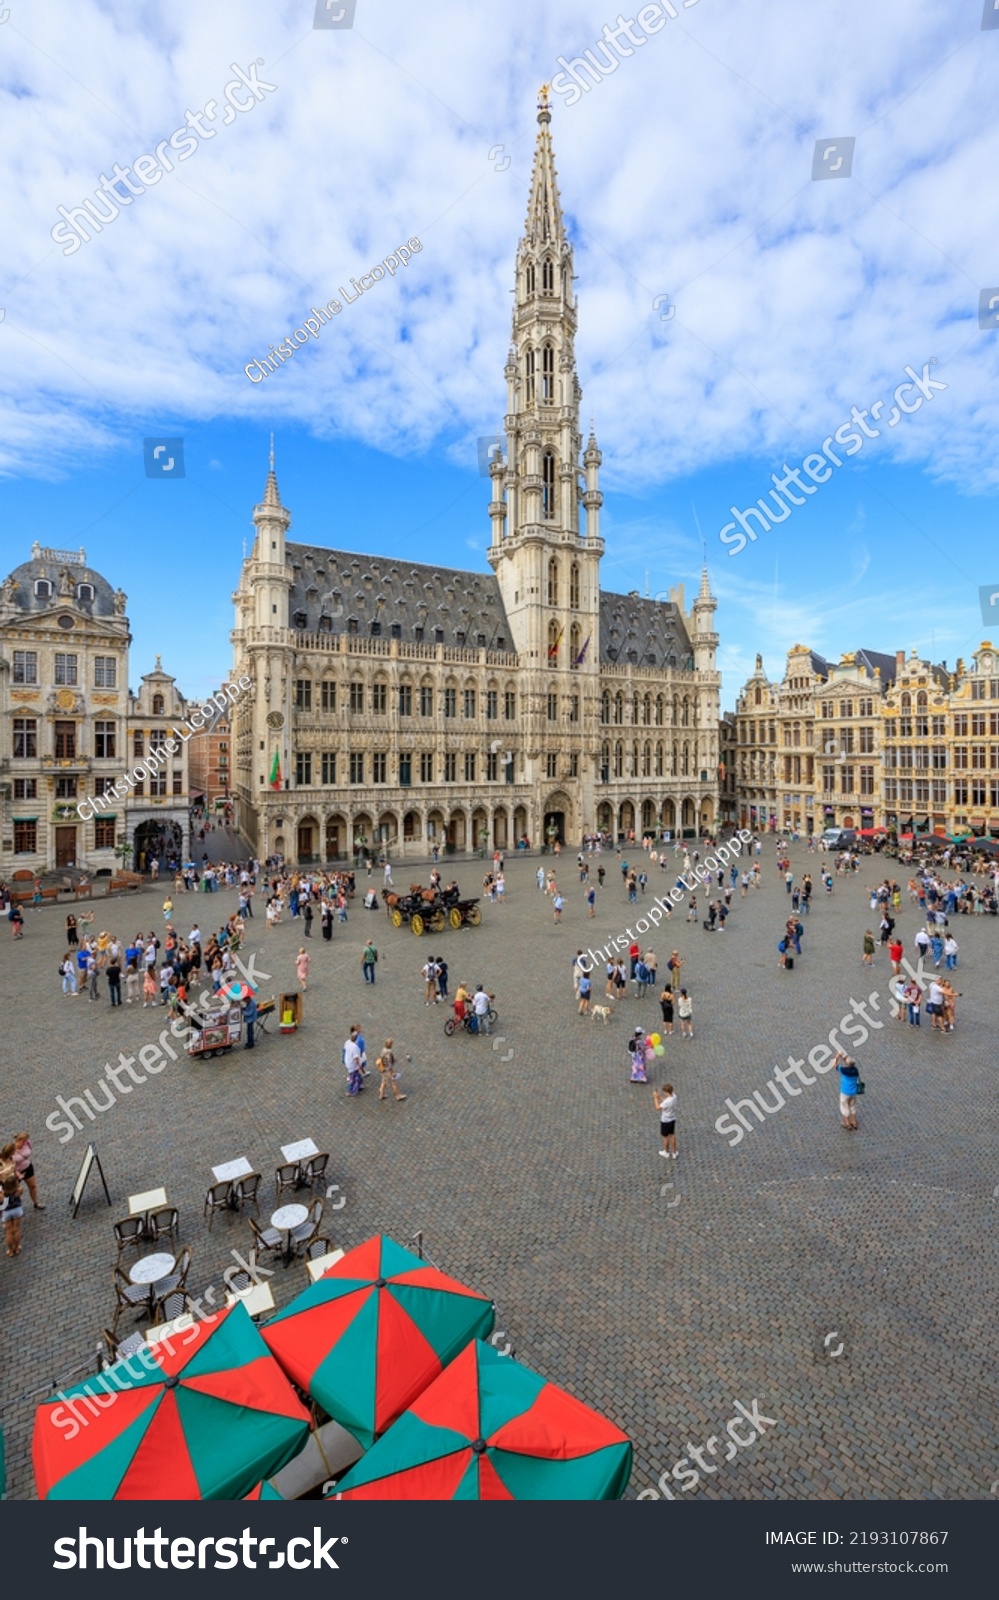 The Grand Place of Brussels in Belgium #2193107867